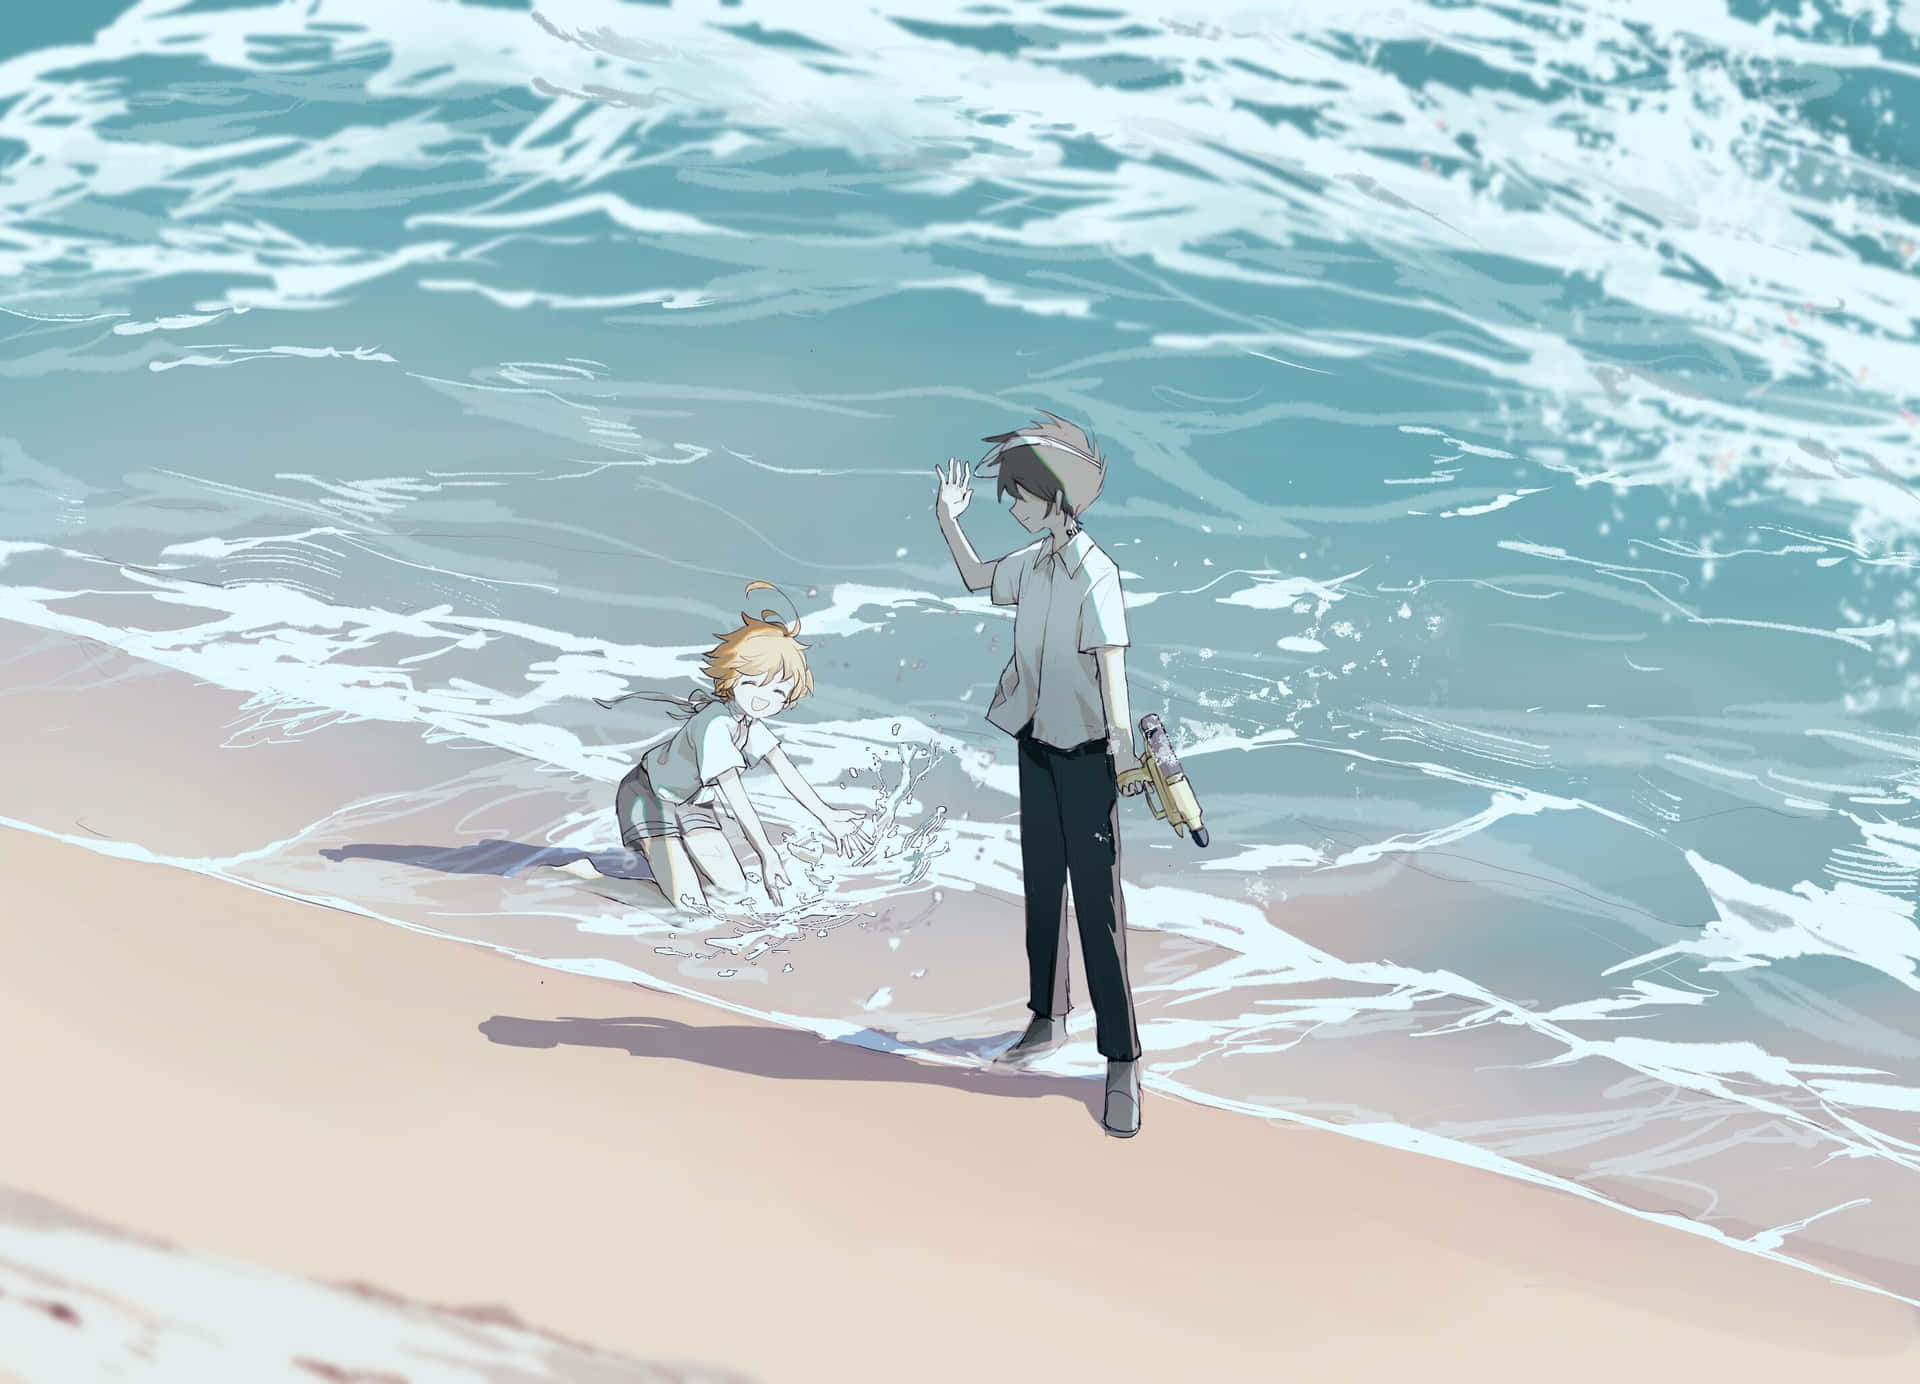 Emma And Ray The Promised Neverland On Beach Wallpaper